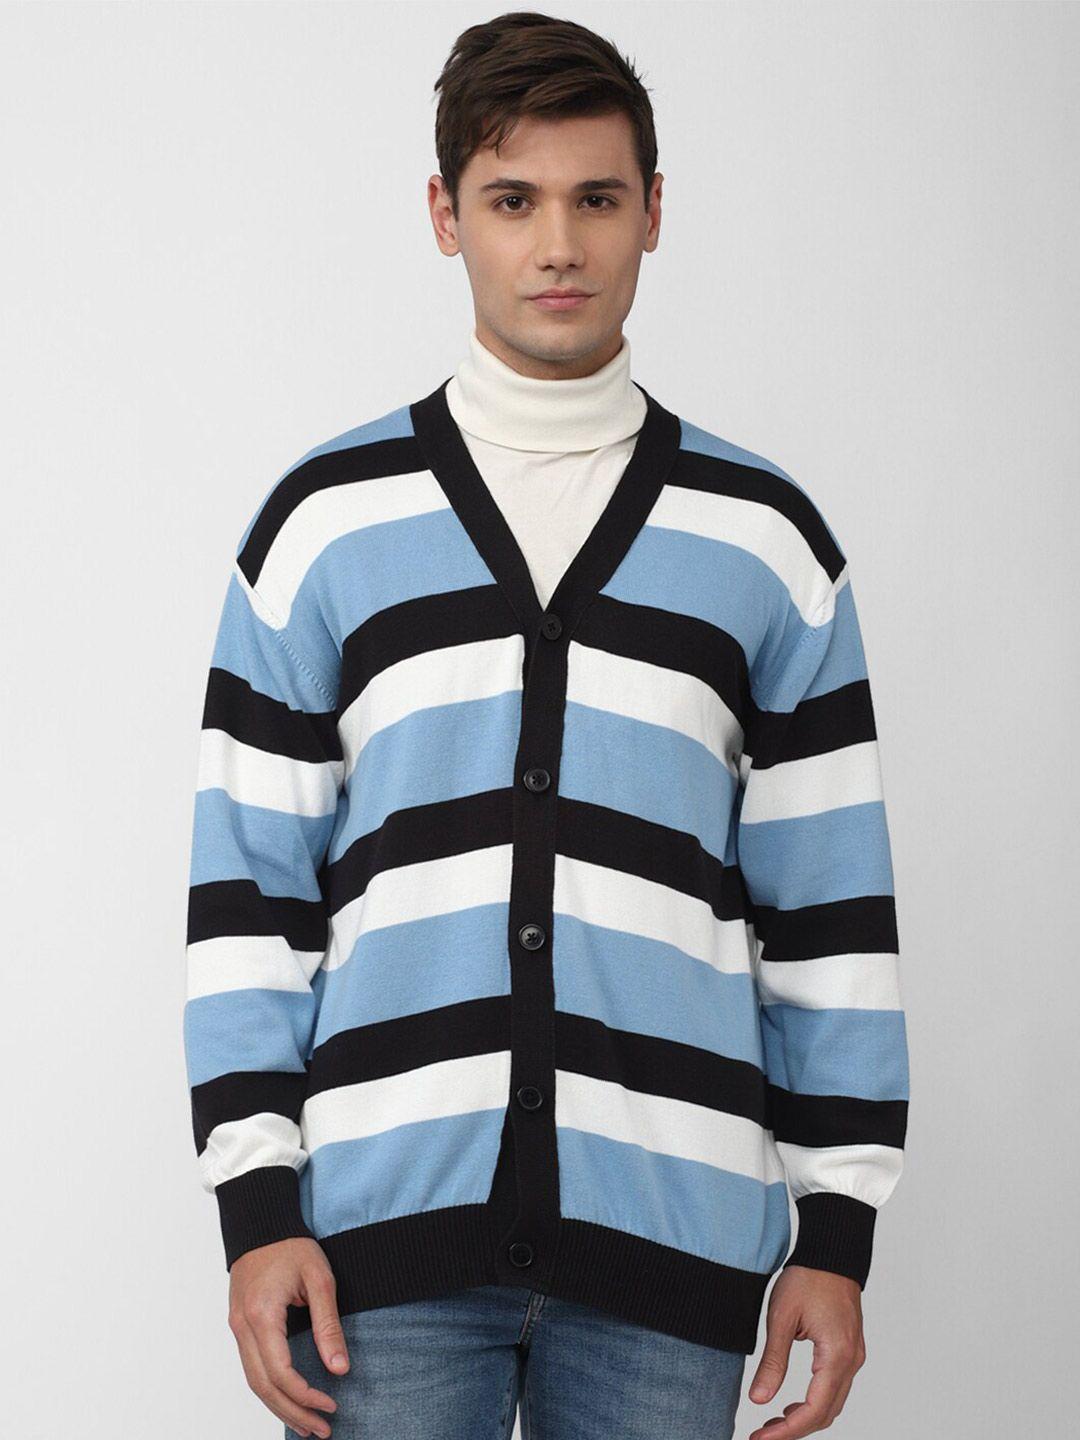 forever-21-men-striped-cardigan-pure-cotton-sweater